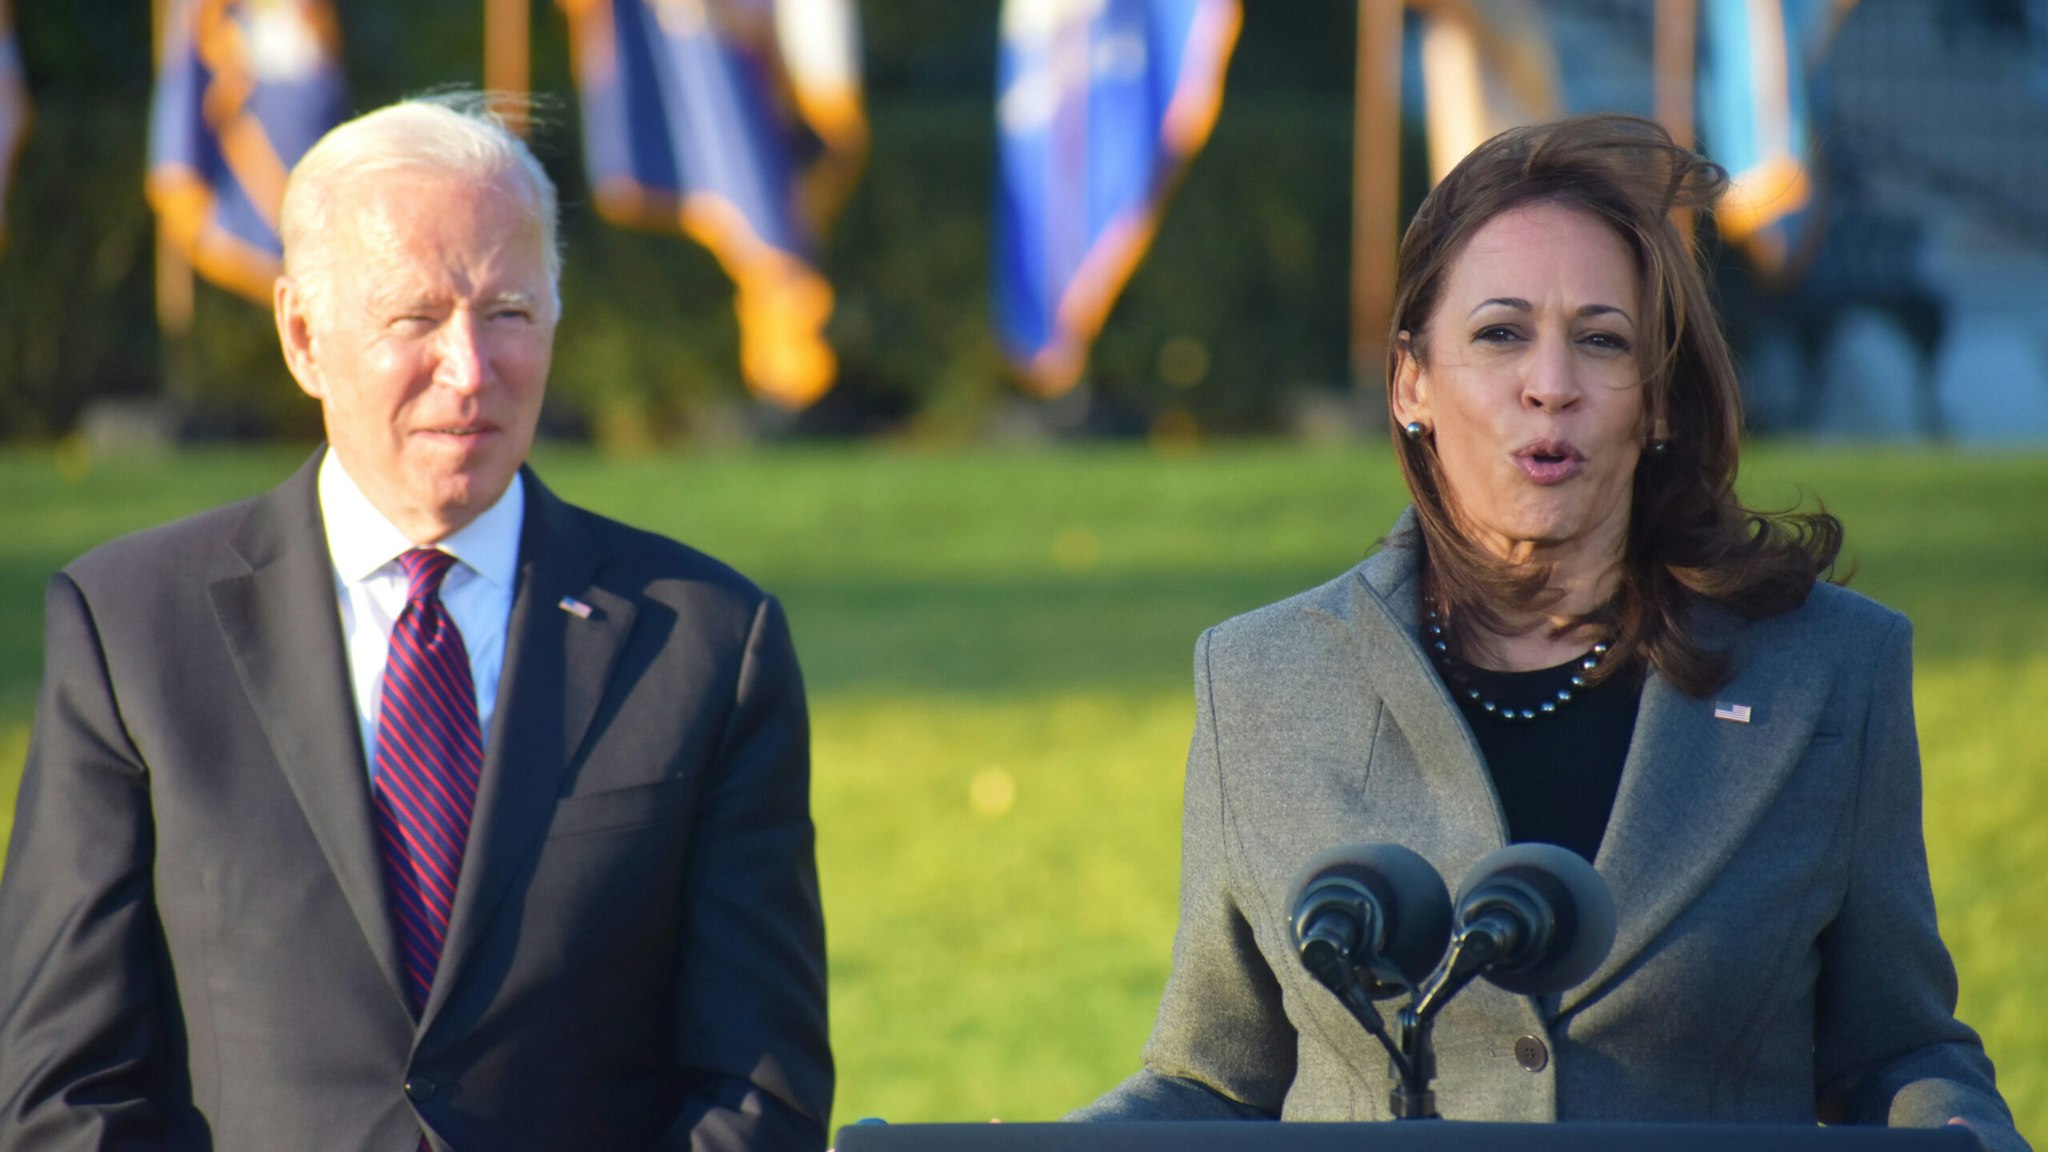 WASHINGTON DC, USA - NOVEMBER 15: Vice President of the United States Kamala Harris (R) delivers remarks alongside President of the United States Joe Biden prior to the signing of the Bipartisan Infrastructure Deal at the White House in Washington, DC on November 15, 2021